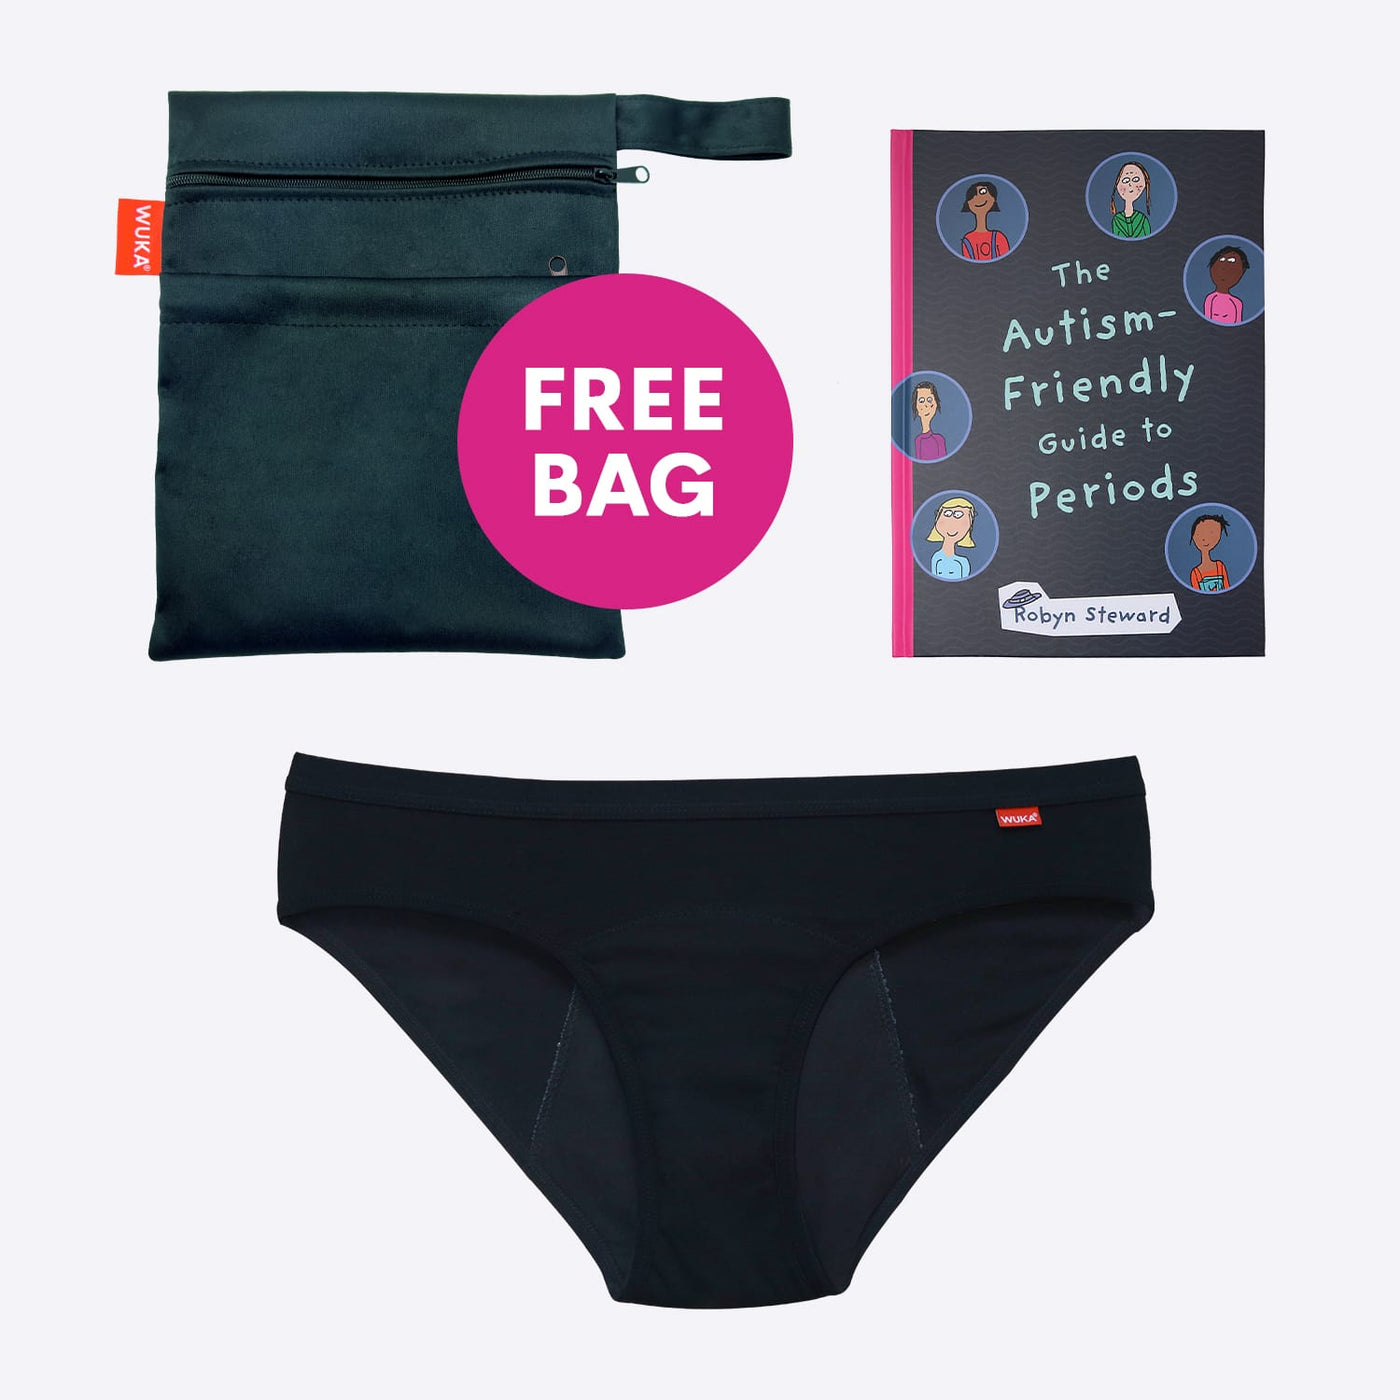 WUKA First Period Pack - Hipster Style - Medium Absorbency - Black Colour - Autism-Friendly Guide To Periods